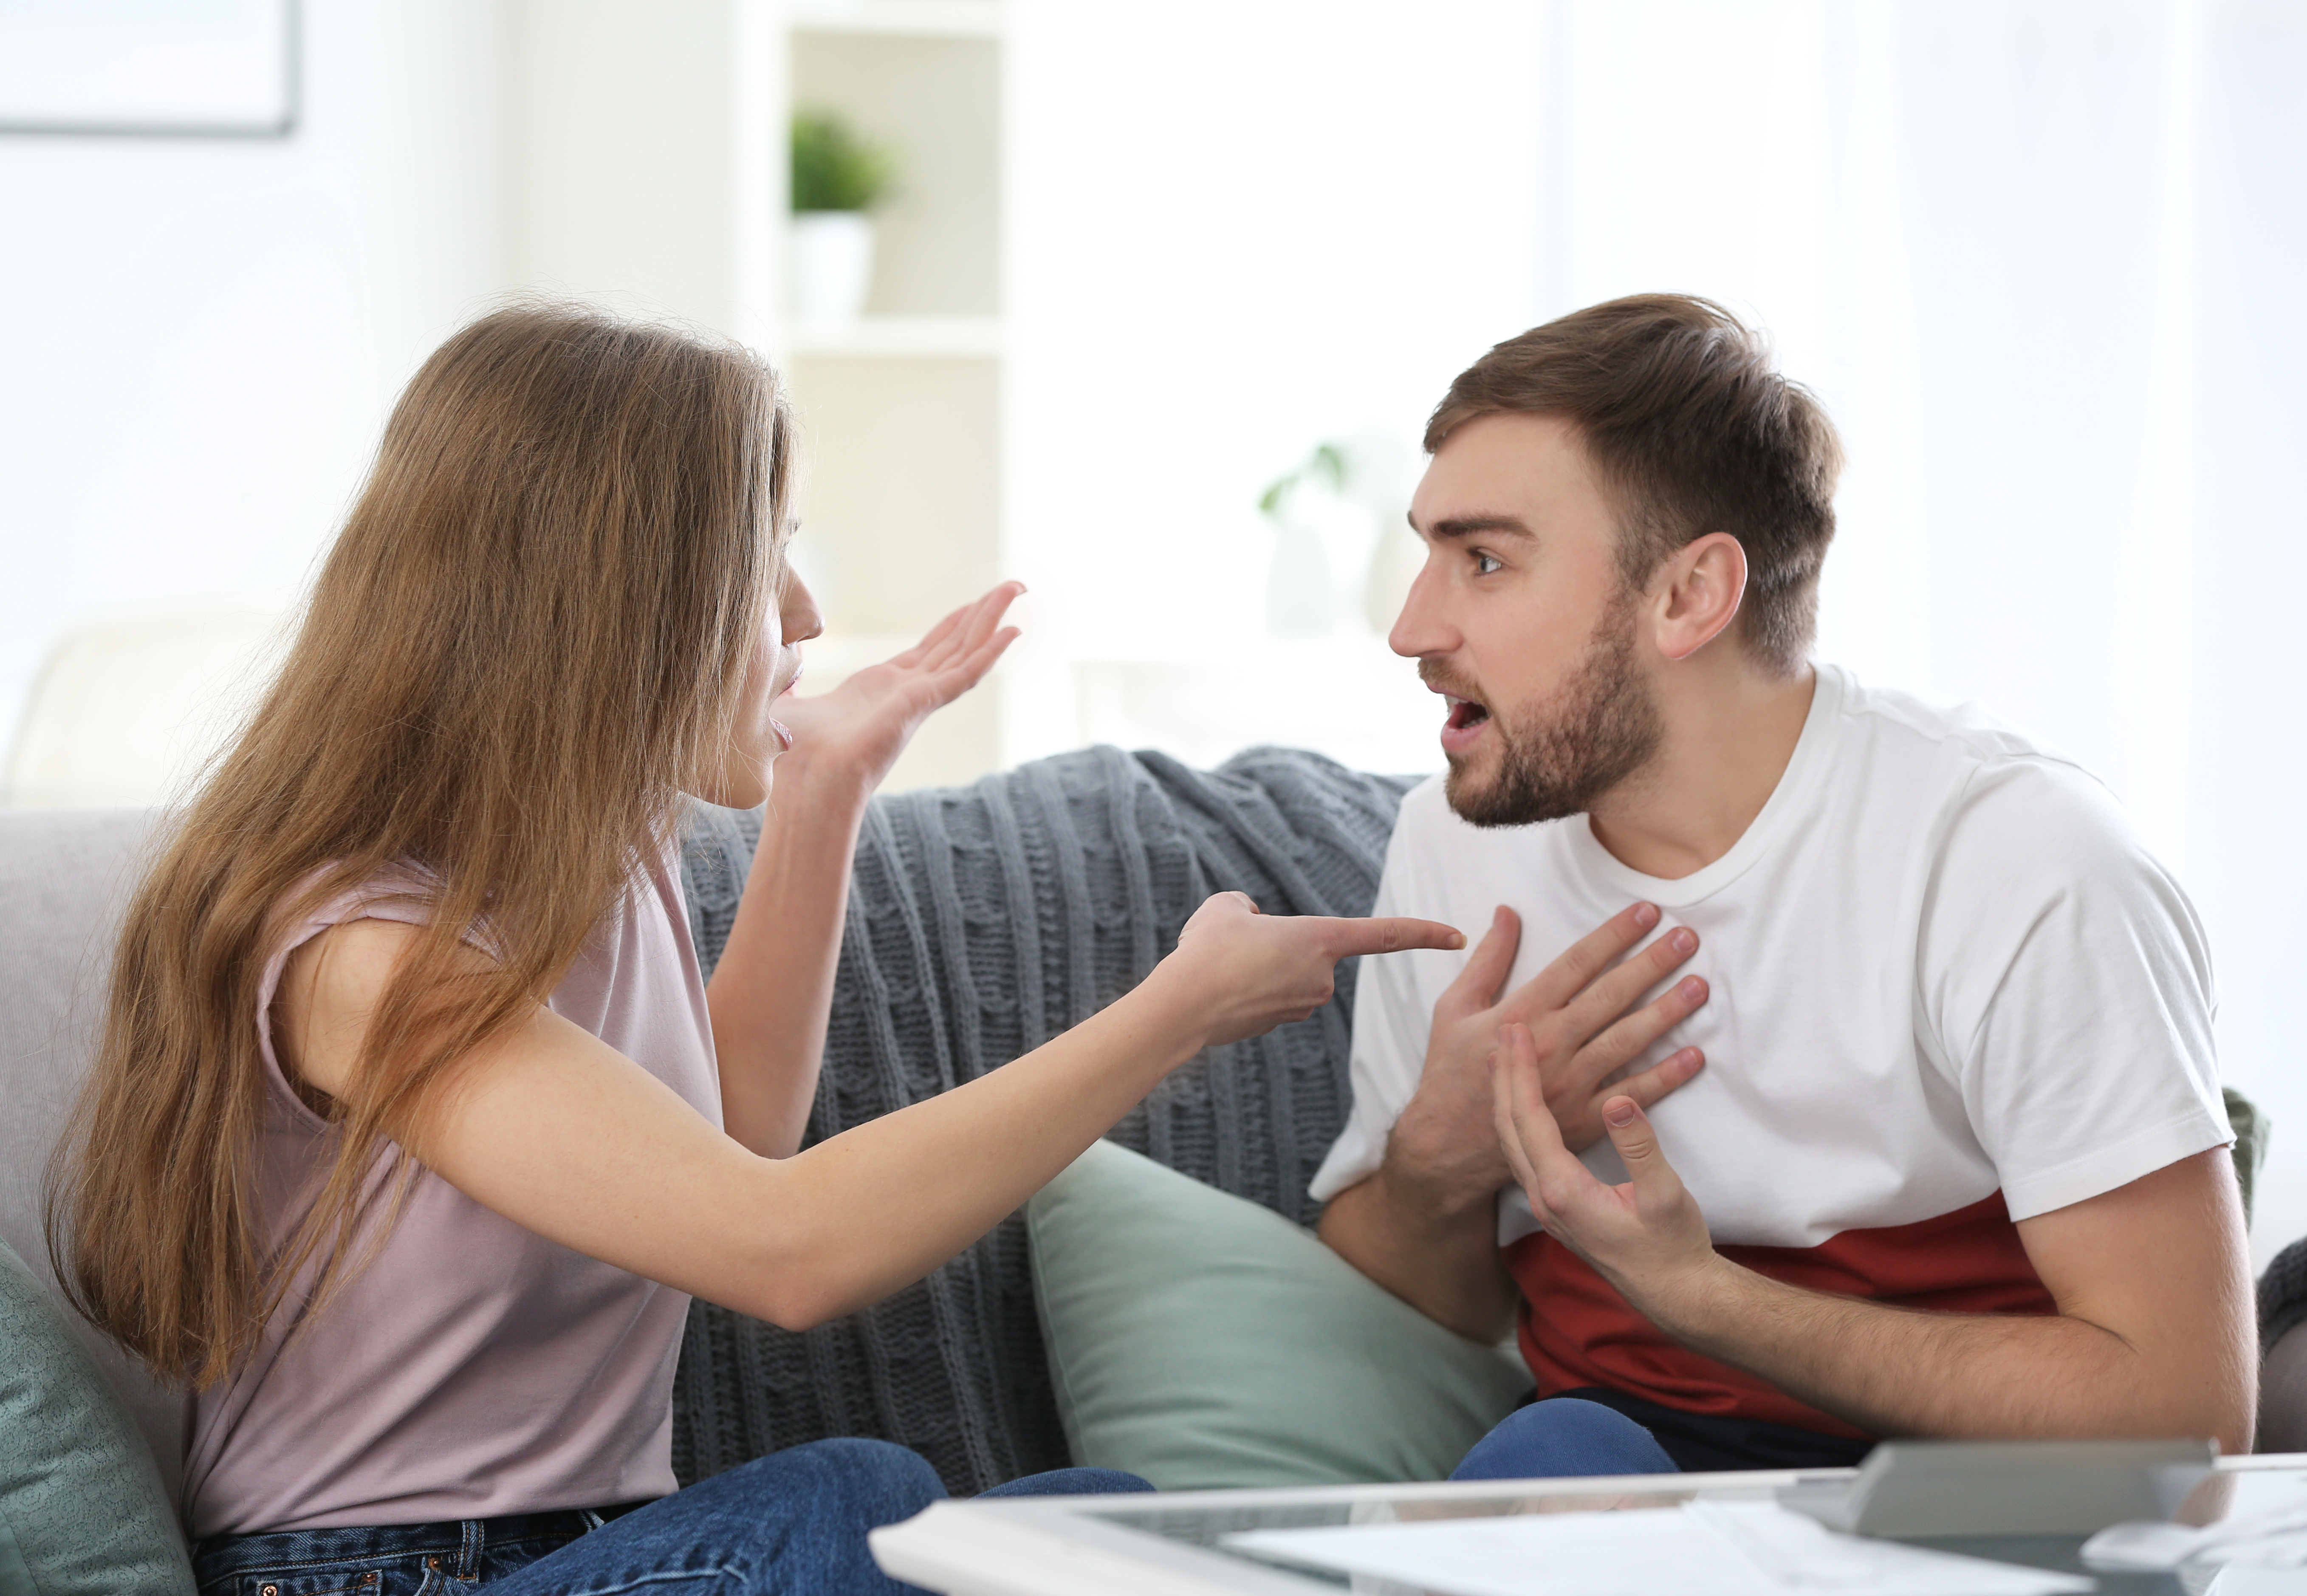 A couple arguing on a sofa | Source: Shutterstock